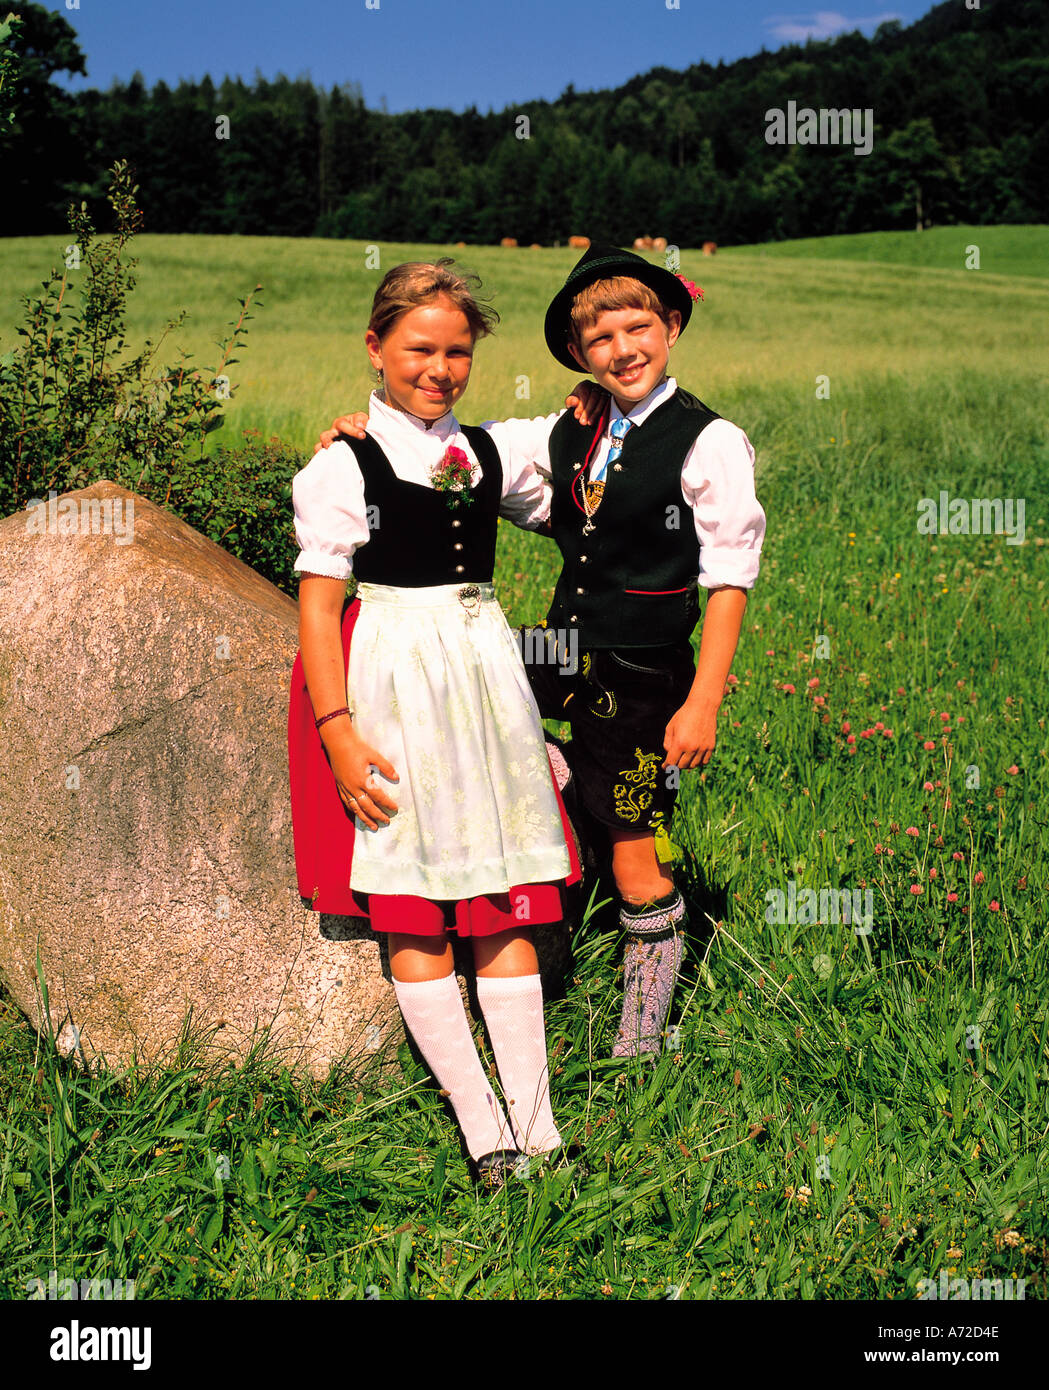 Bavarian Children in traditional costumes in Germany Stock Photo - Alamy